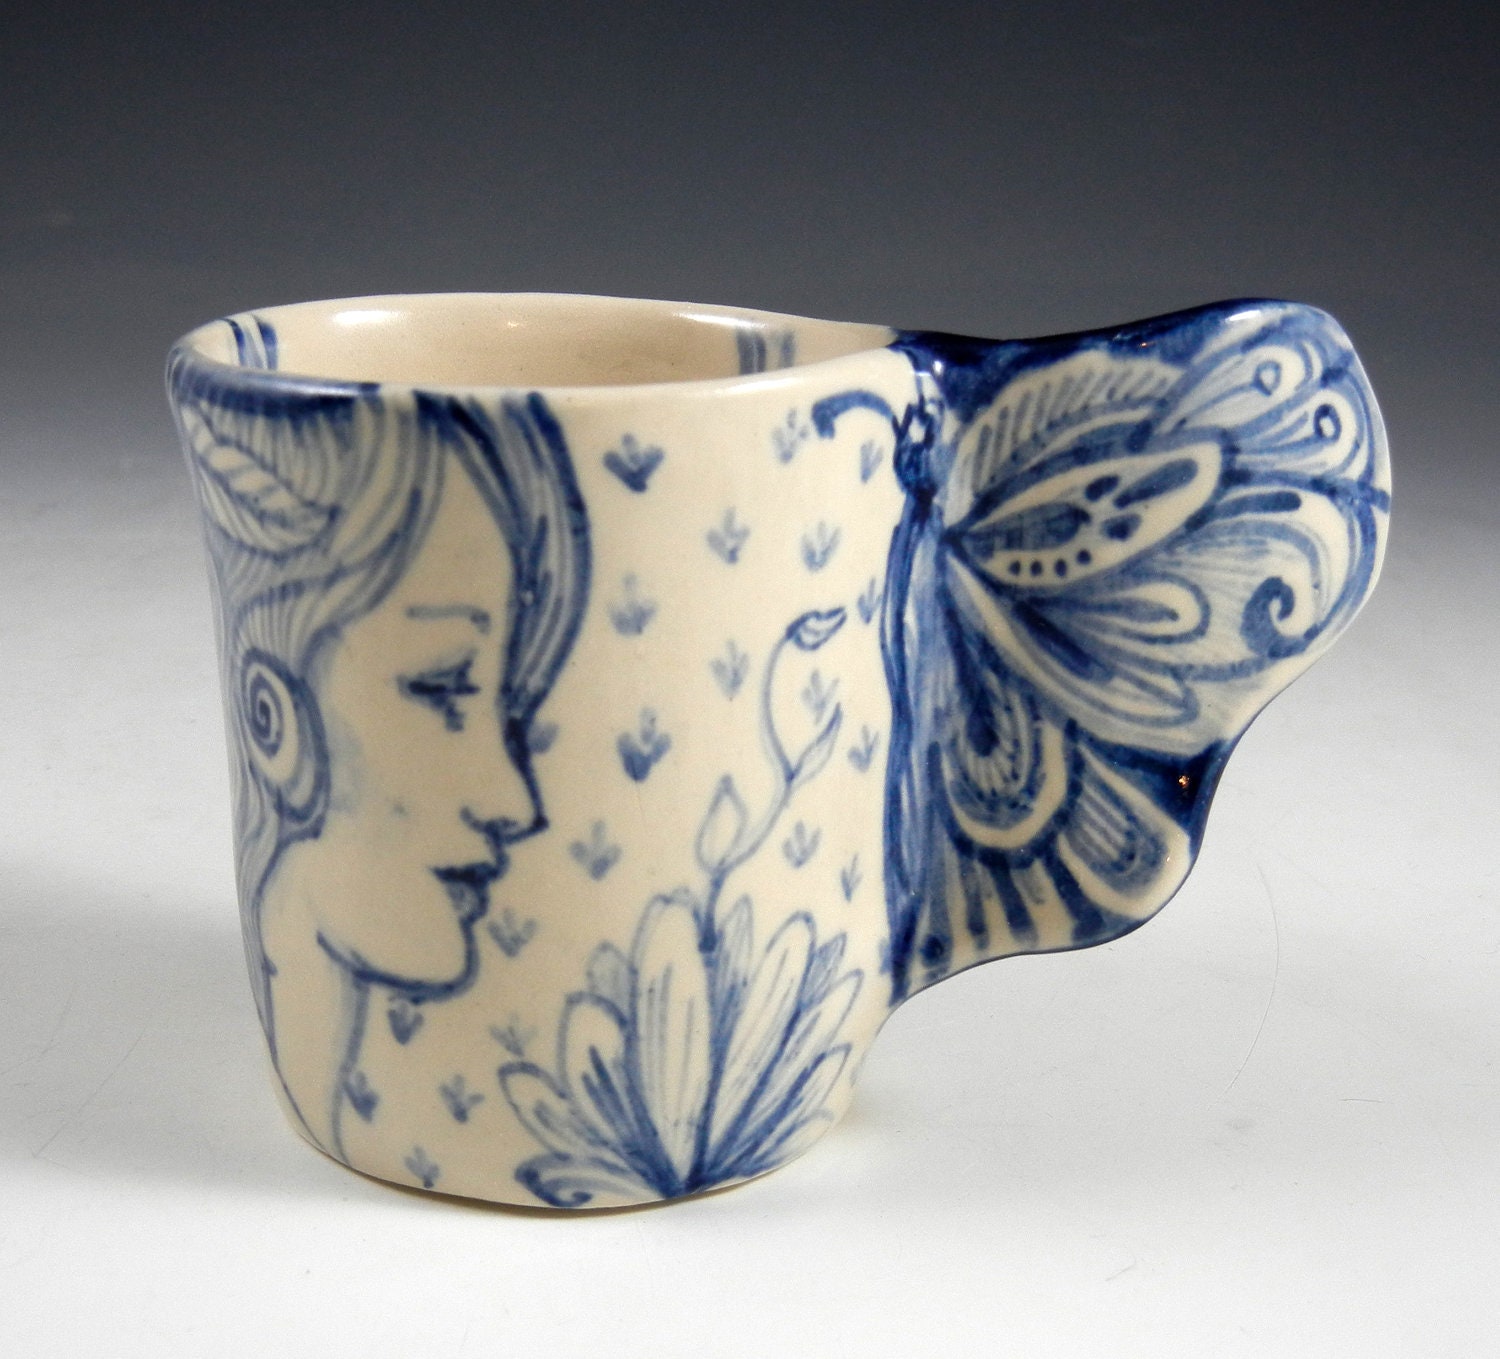 Blue and white porcelain cup with butterfly wing and three faces